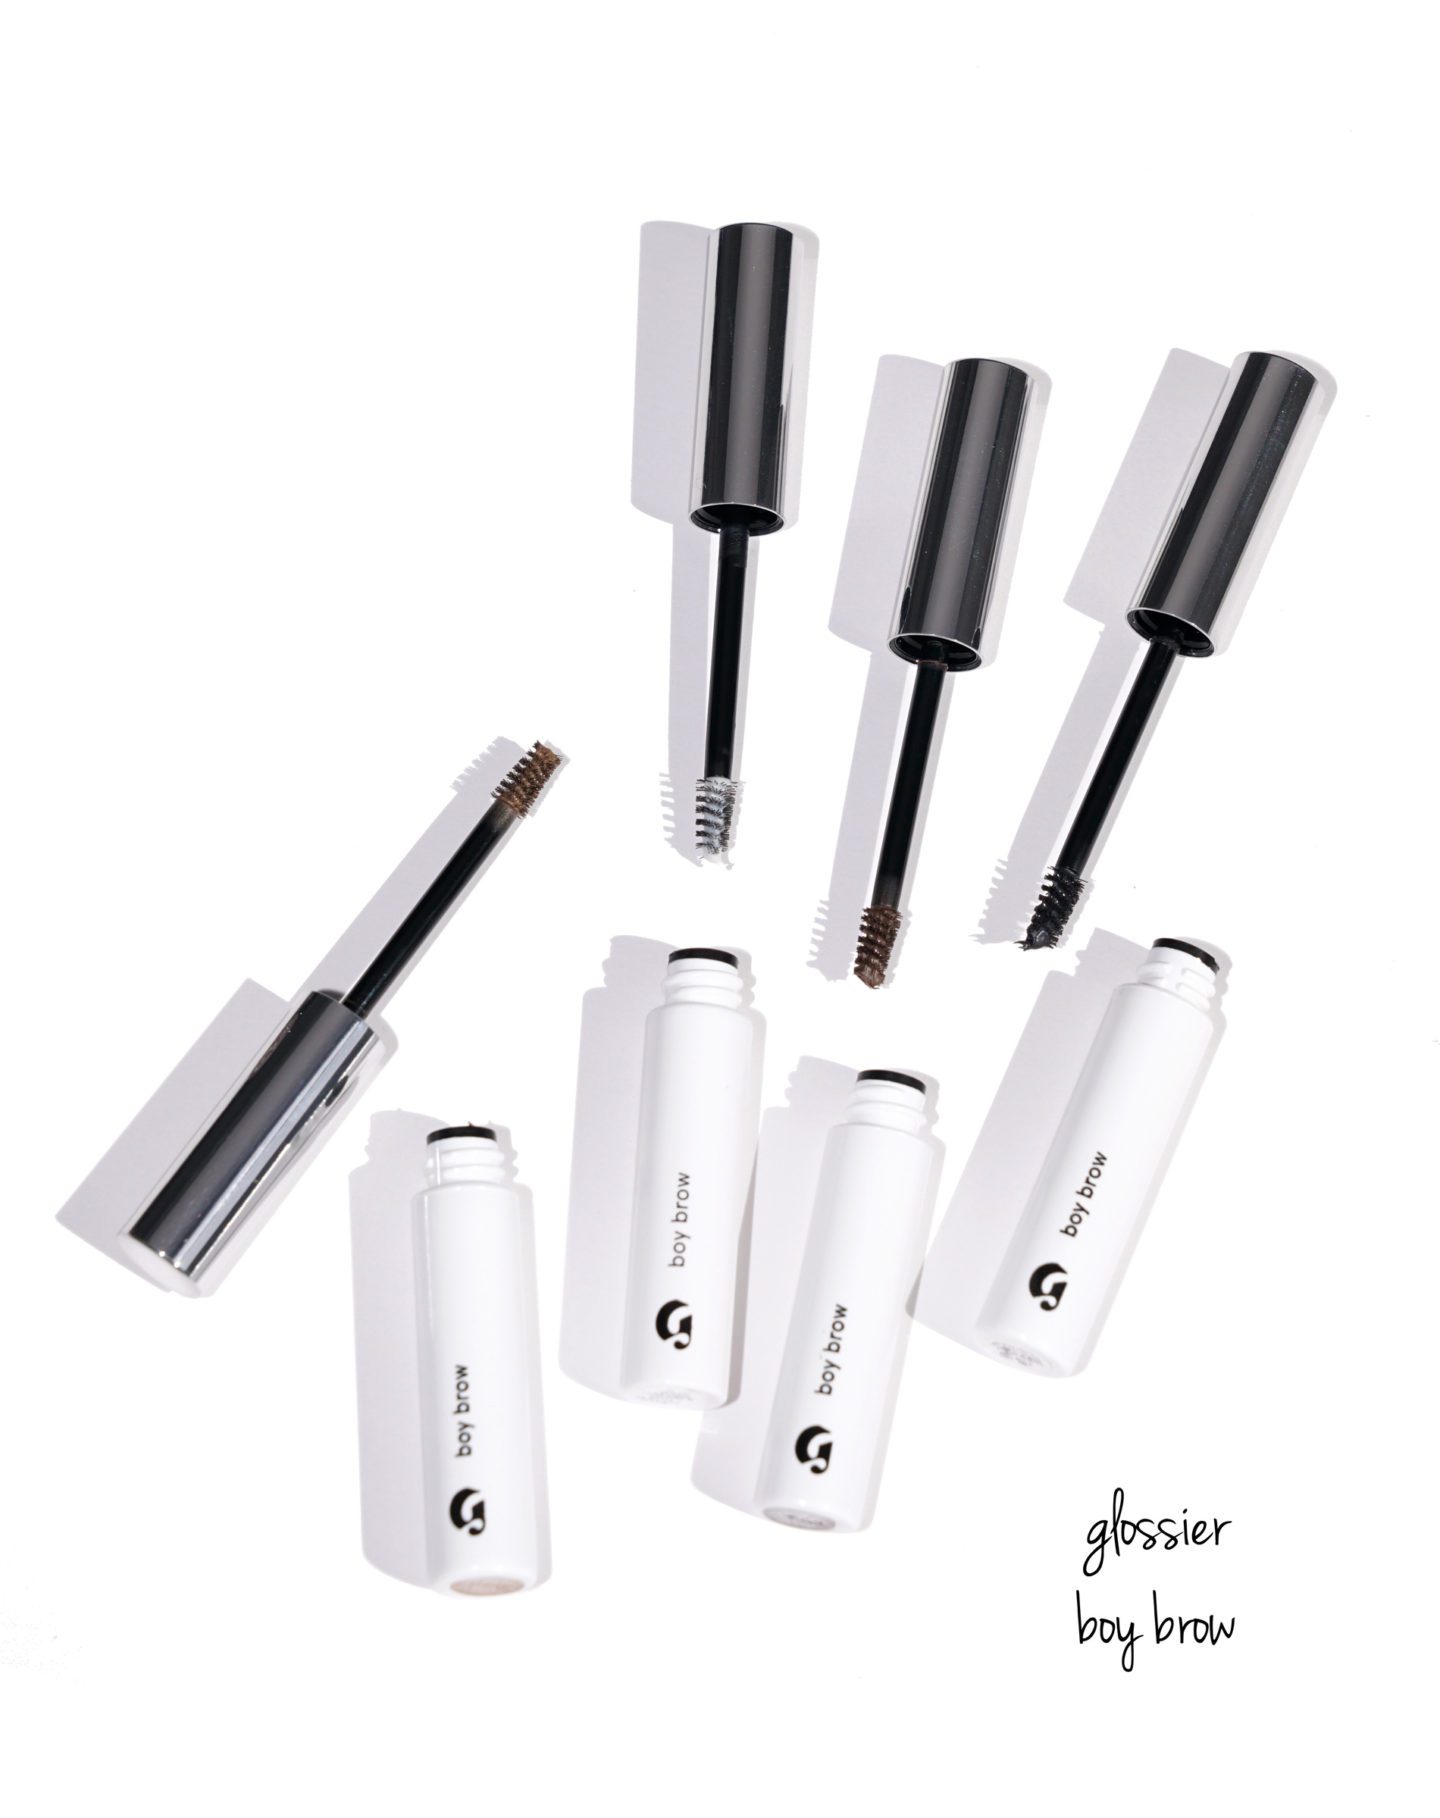 Glossier Boy Brow Review and Swatches